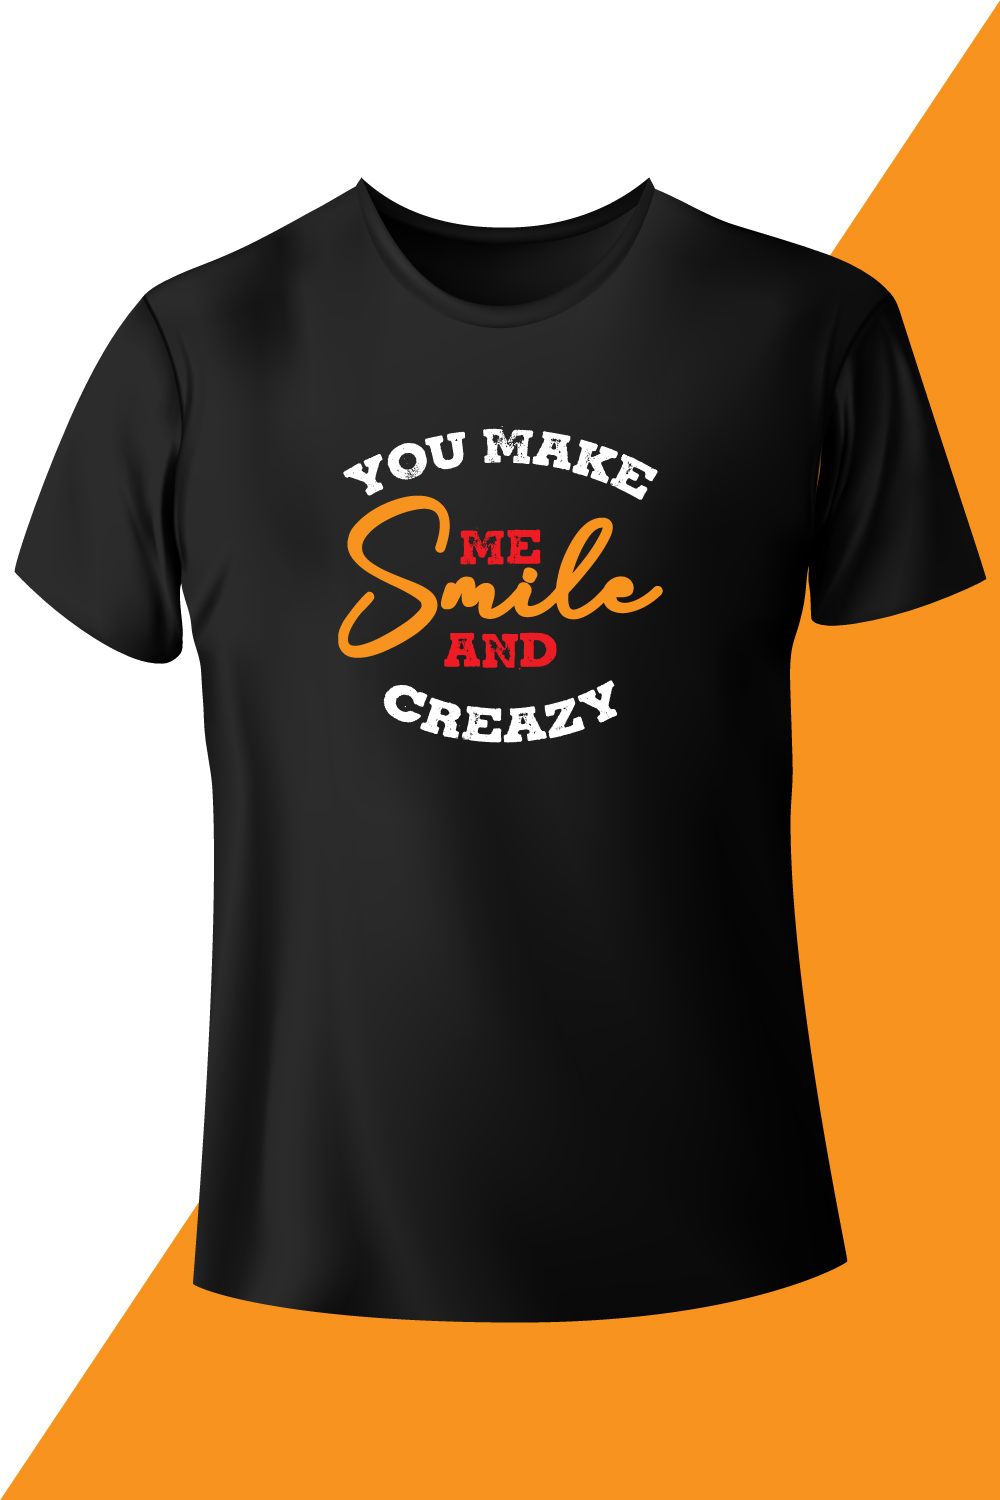 Image with a black t-shirt with a great inscription you make me smile and crazy.